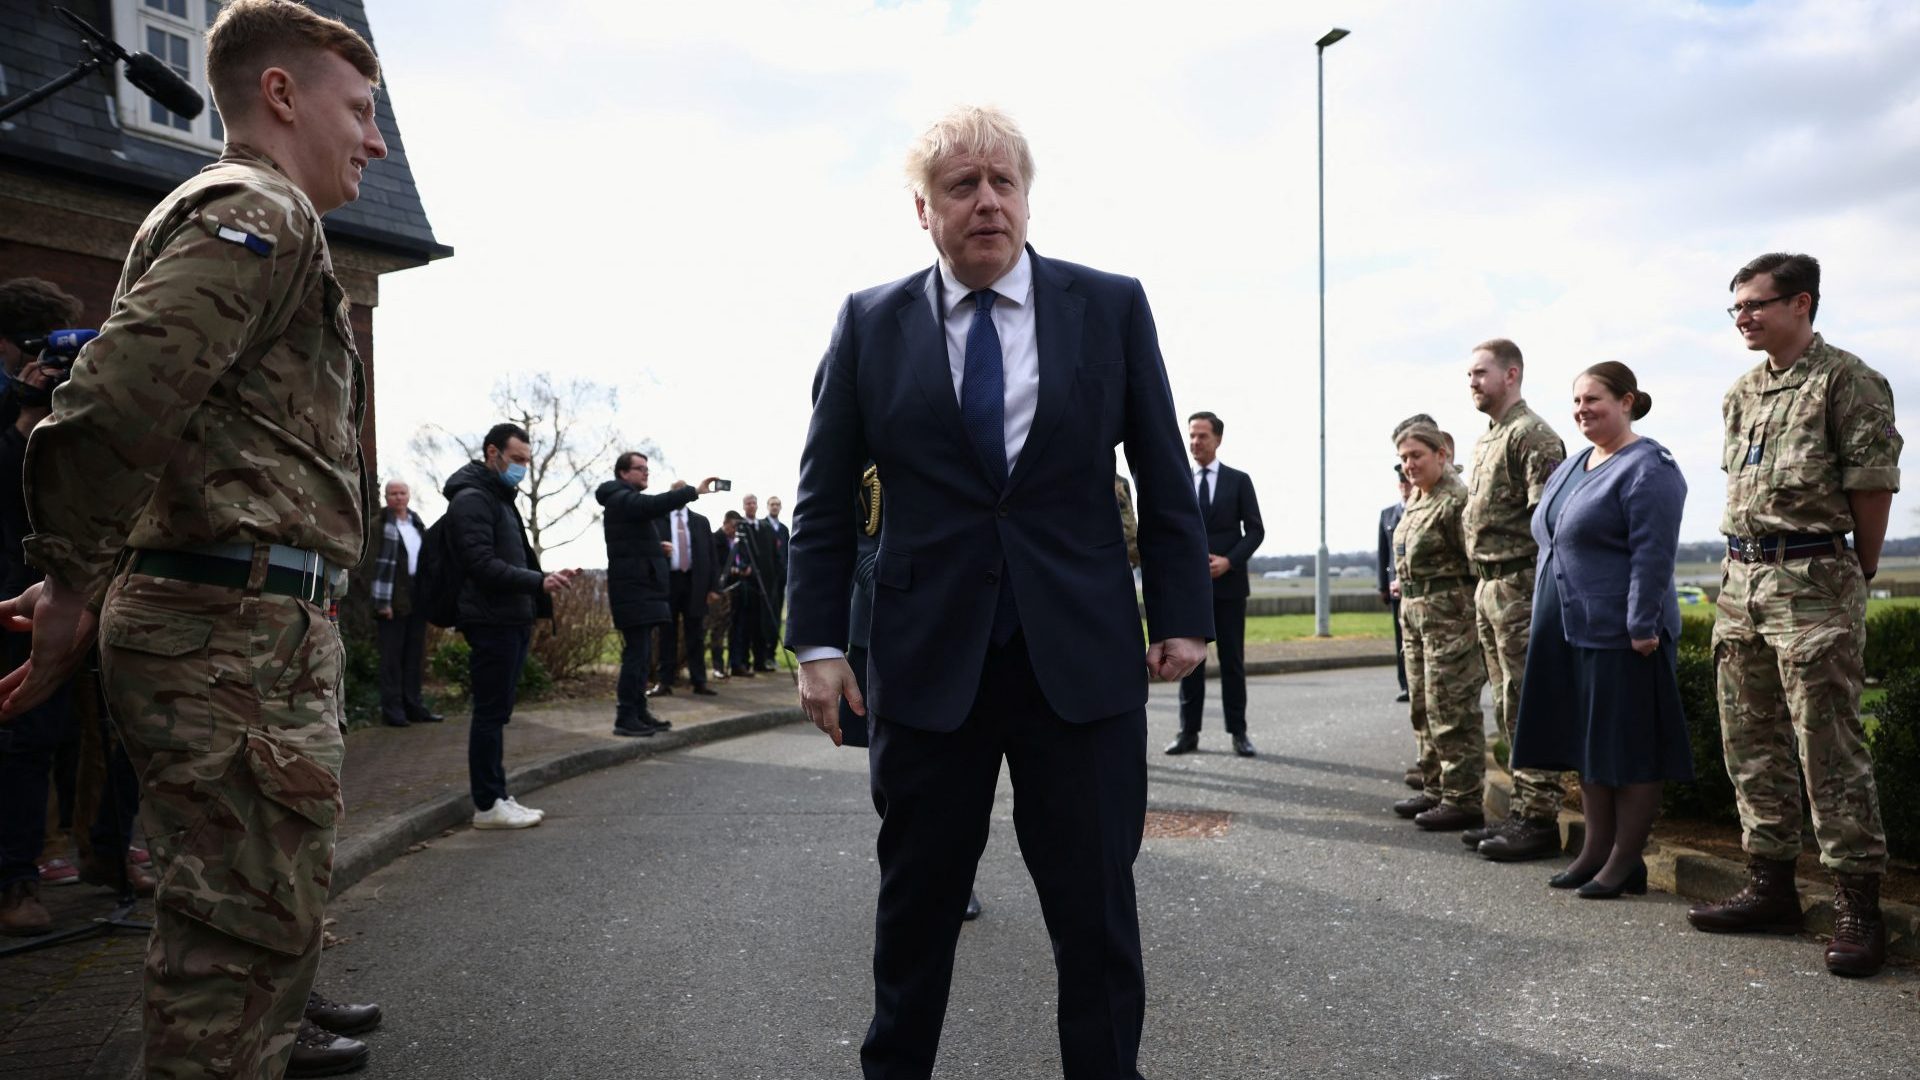 Prime Minister Boris Johnson reviewed troops during a visit to at RAF Northolt. Photo:  Henry Nicholls/PA Wire/PA Images